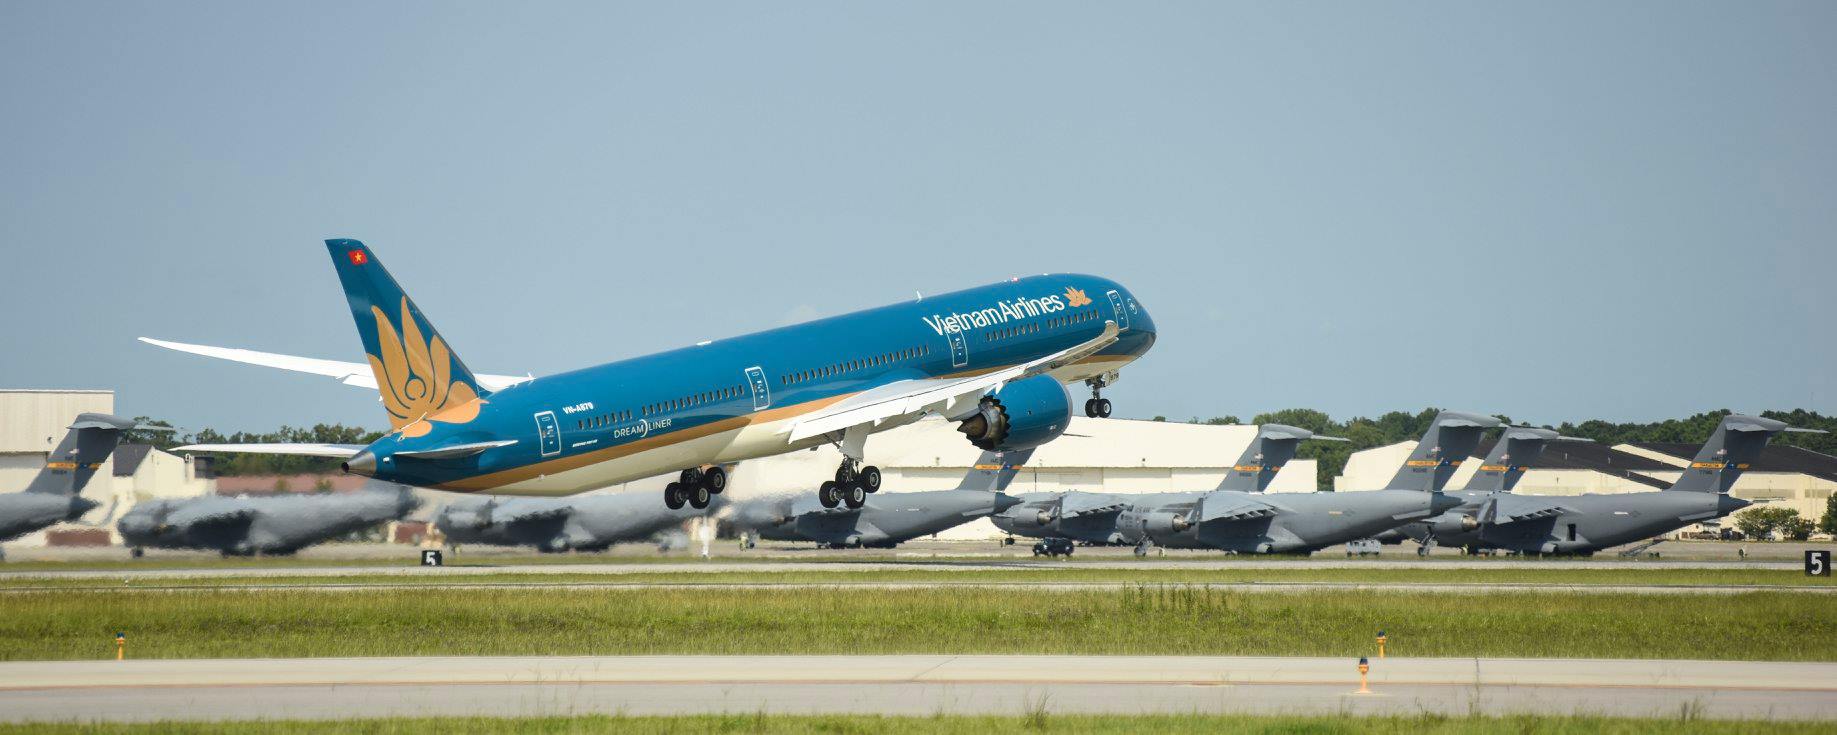 Vietnam Airlines granted permit to operate US flights